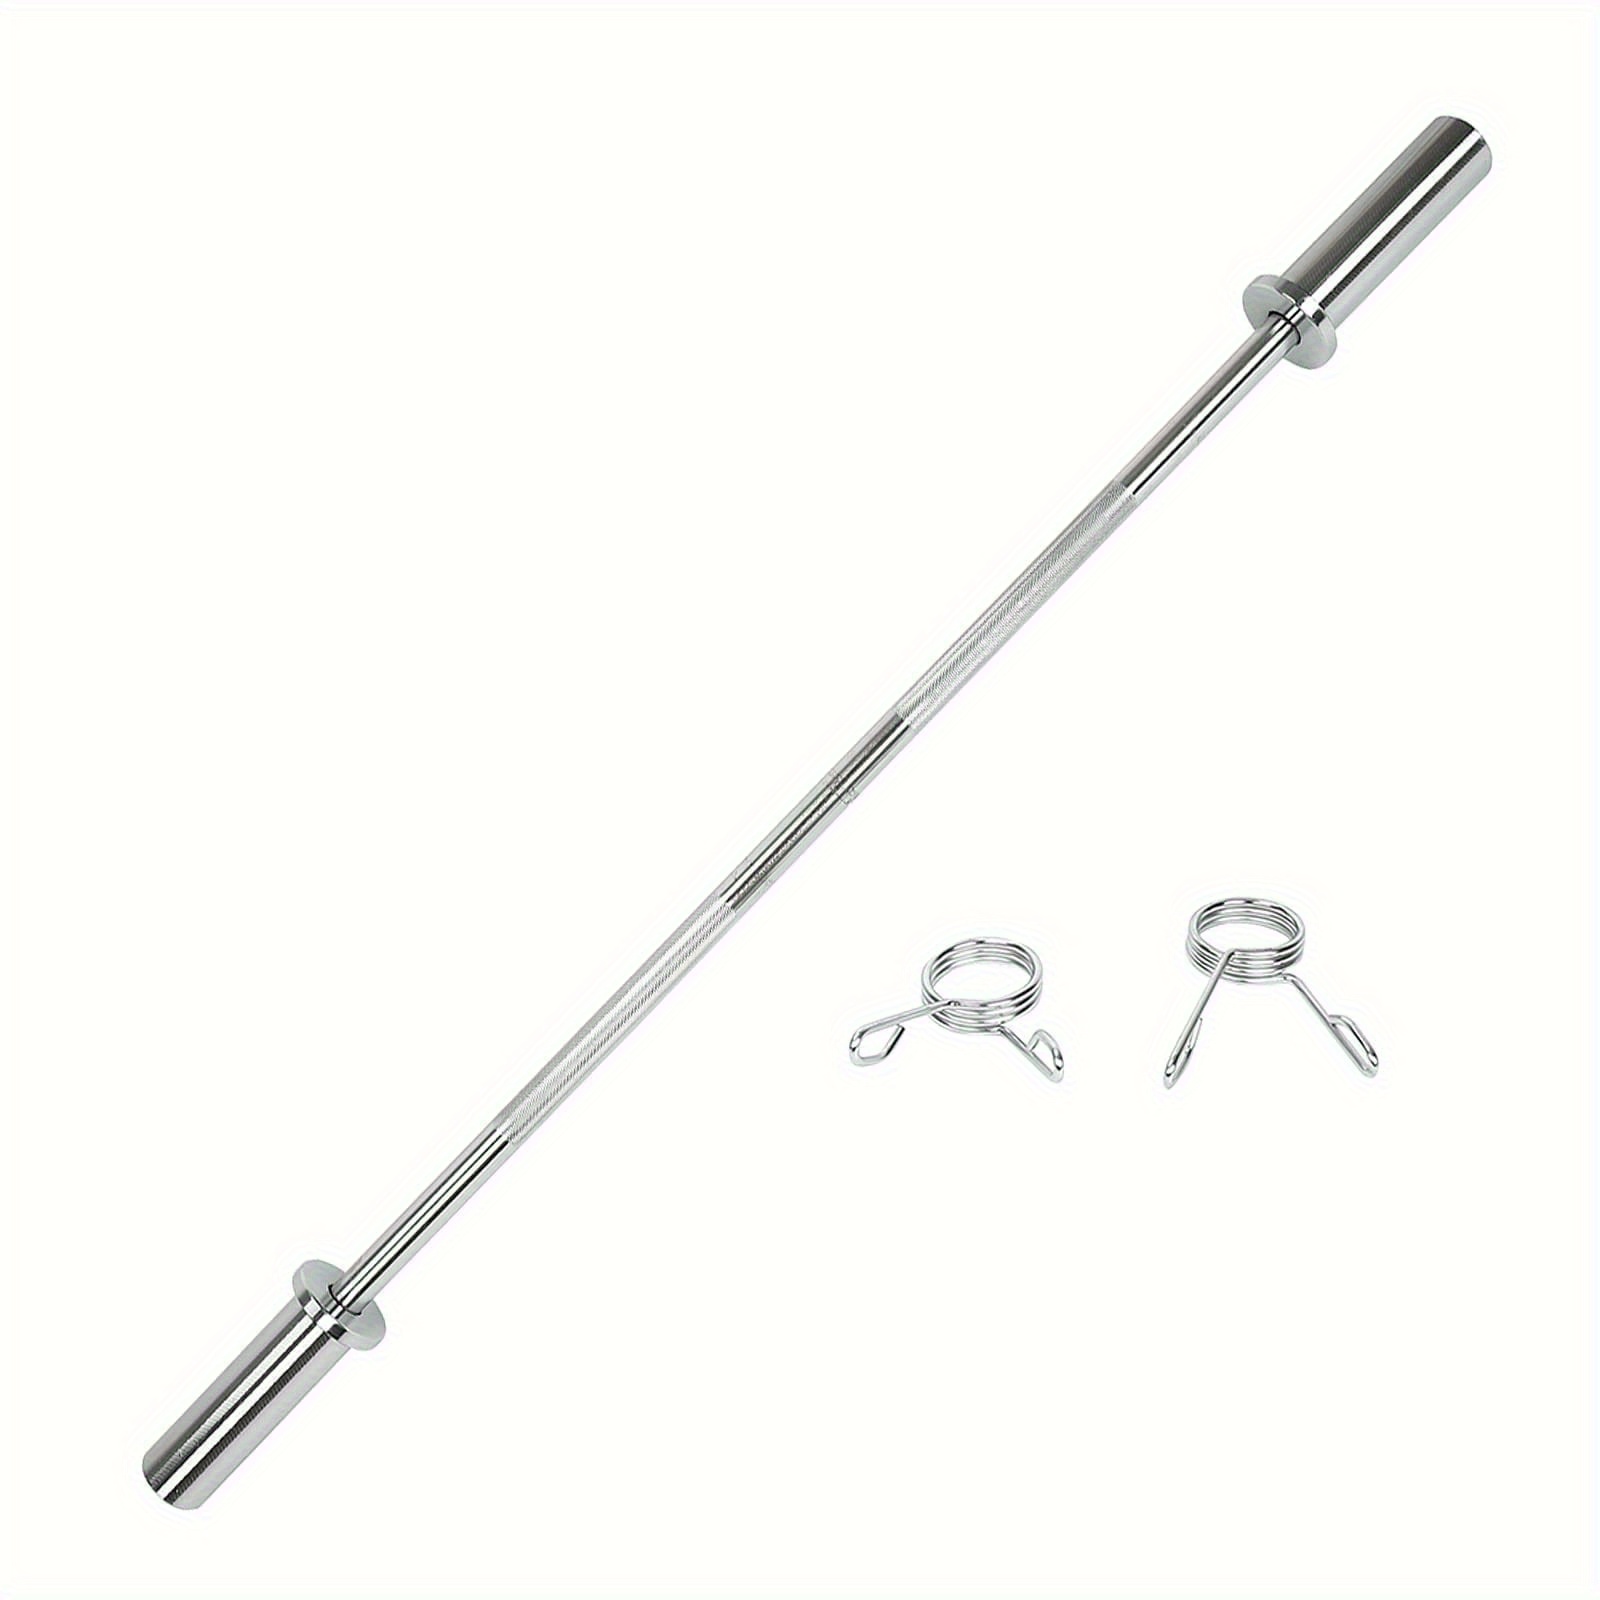 

Threaded Chrome Barbell Bar 1-2 Inch Barbell Diameter With Ring Collars Long Barbell Weightlifting Barbell For Bicep, Tricep And Weight Lifting Exercises